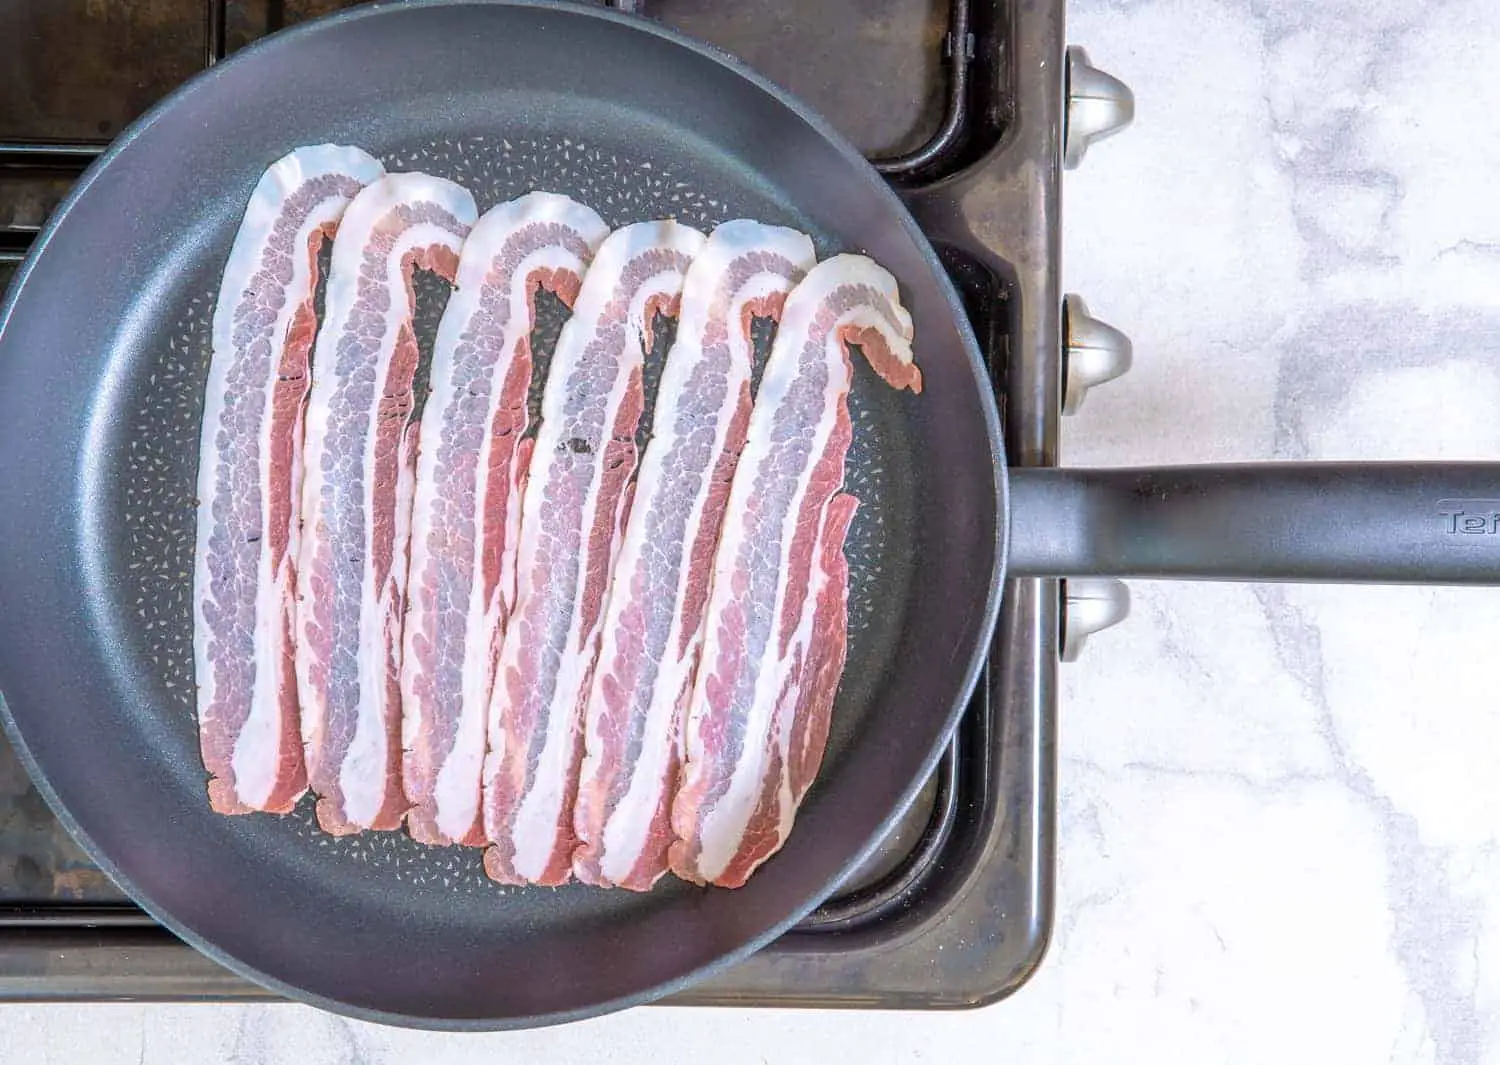 To cook the bacon, begin by placing the slices in a single layer on a cold, large skillet. 